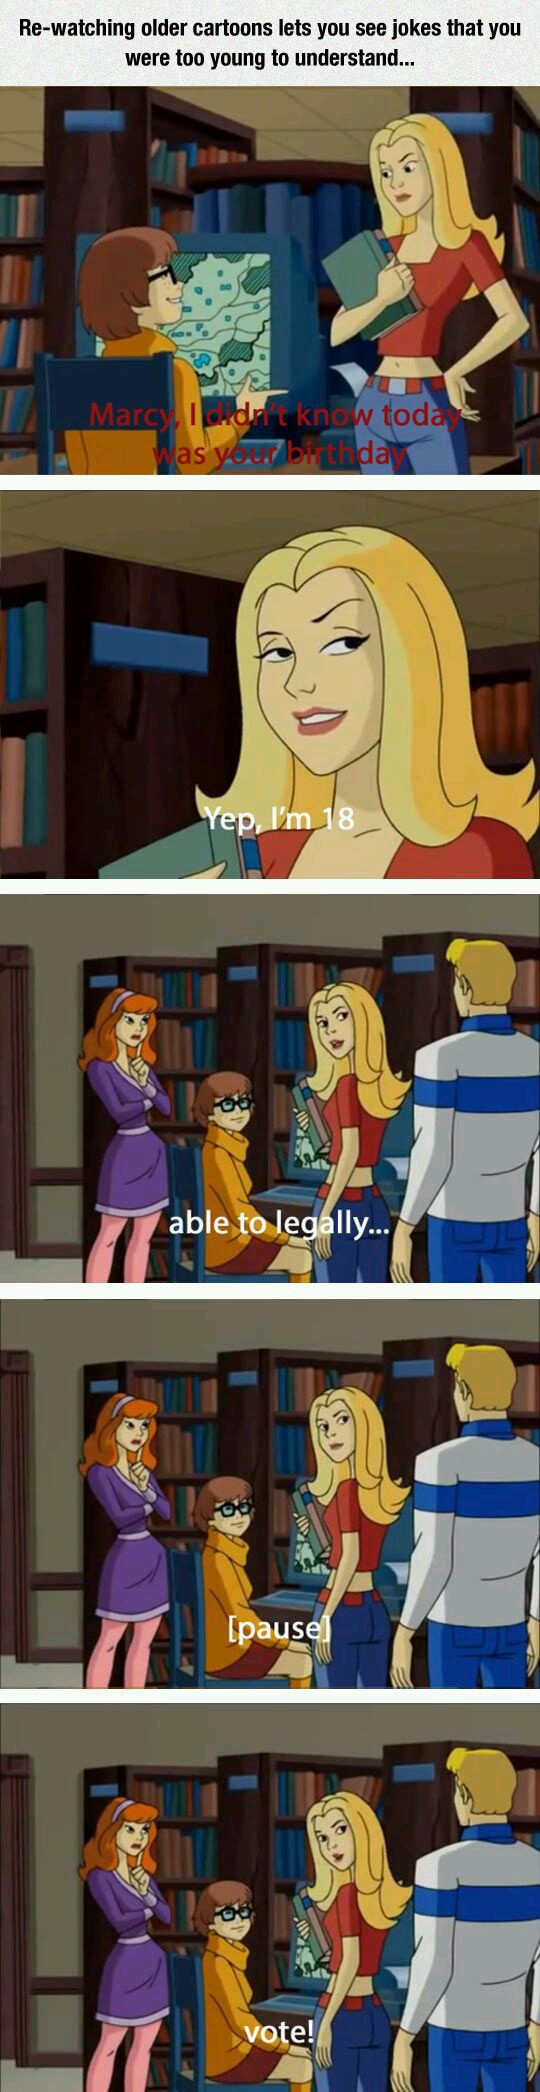 24 Awesome Scooby Doo Memes And Funny Pics To Make You Survive To The Weekend